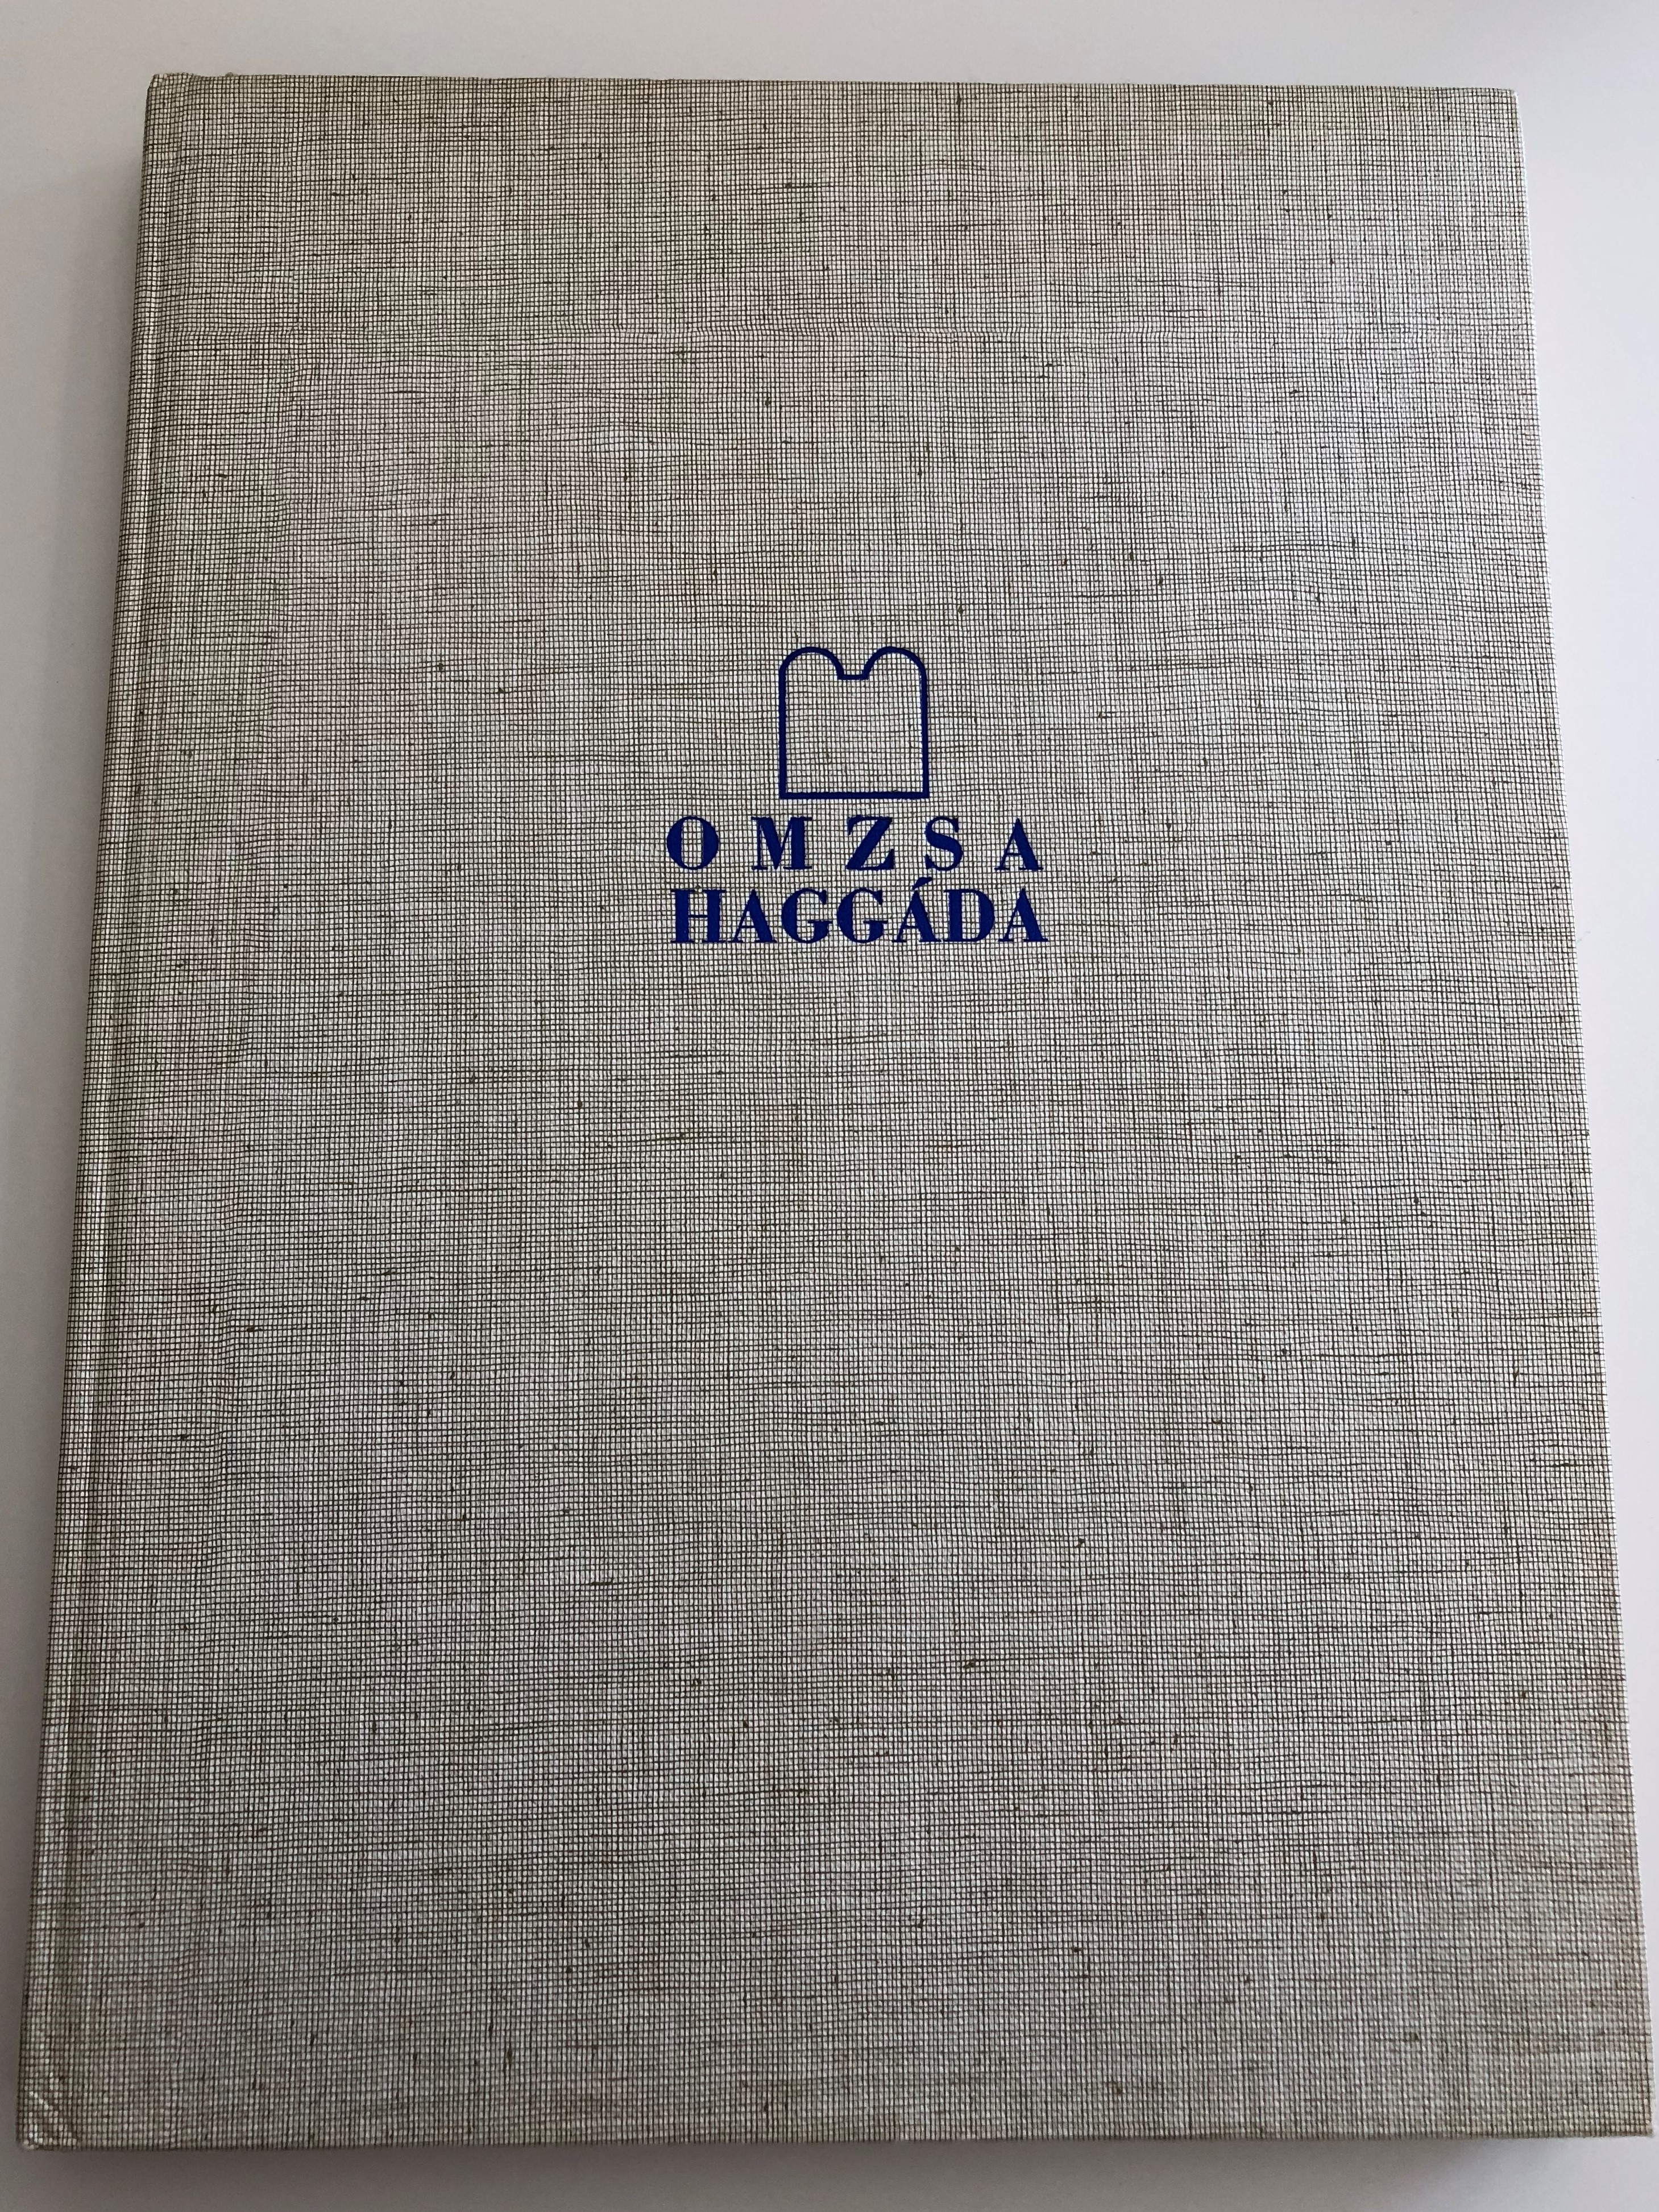 hagg-da-o.m.z.s.a-pesah-haggadah-the-order-of-the-passover-seder-hebrew-hungarian-bilingual-edition-the-story-of-the-exodus-prayers-psalms-and-hyms-translated-by-kohn-zolt-n-1-.jpg